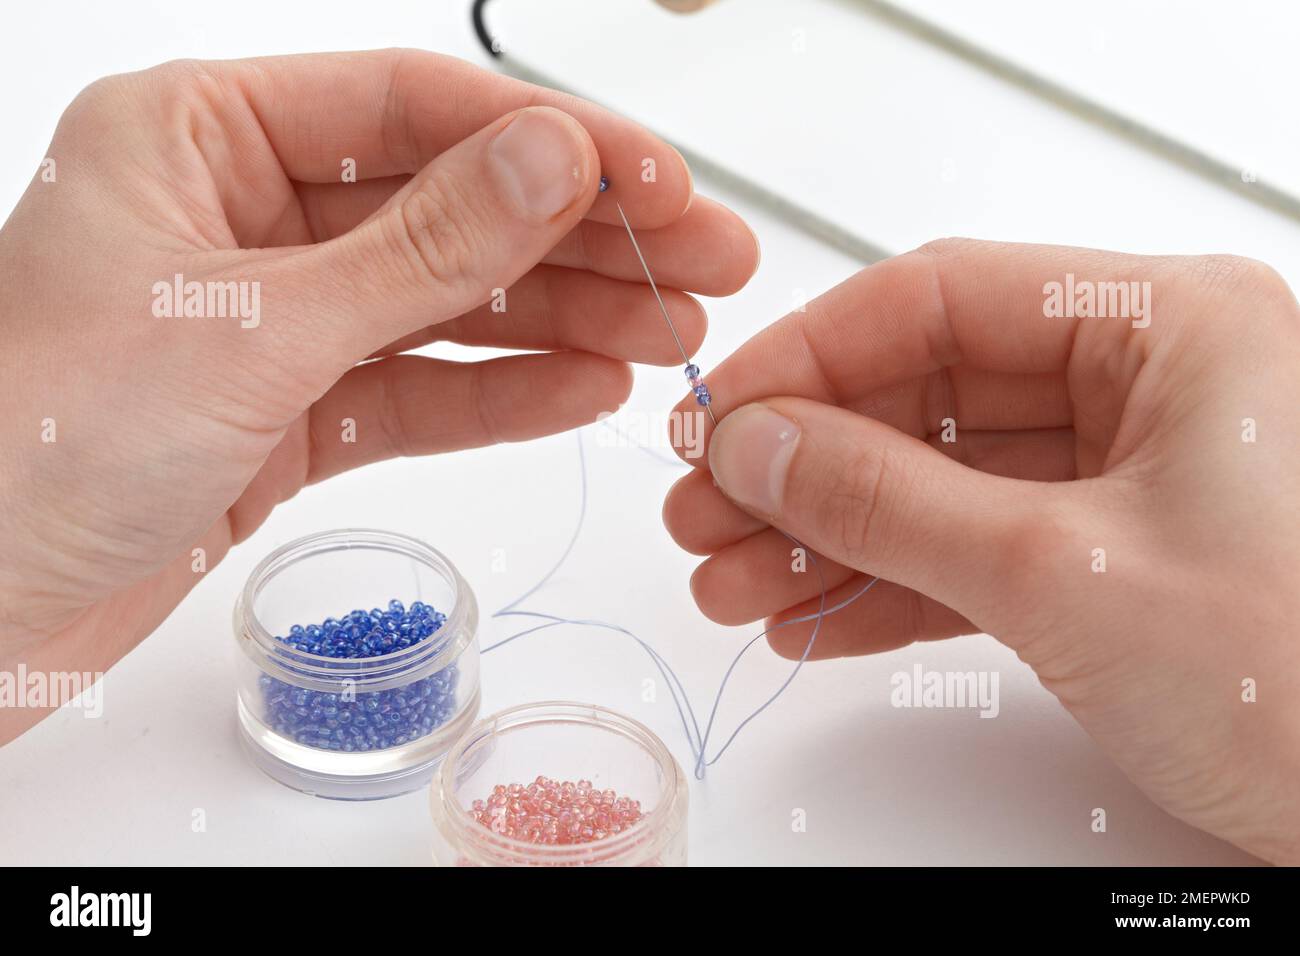 Beading mat with finished designs, needles and colourful beads Stock Photo  - Alamy